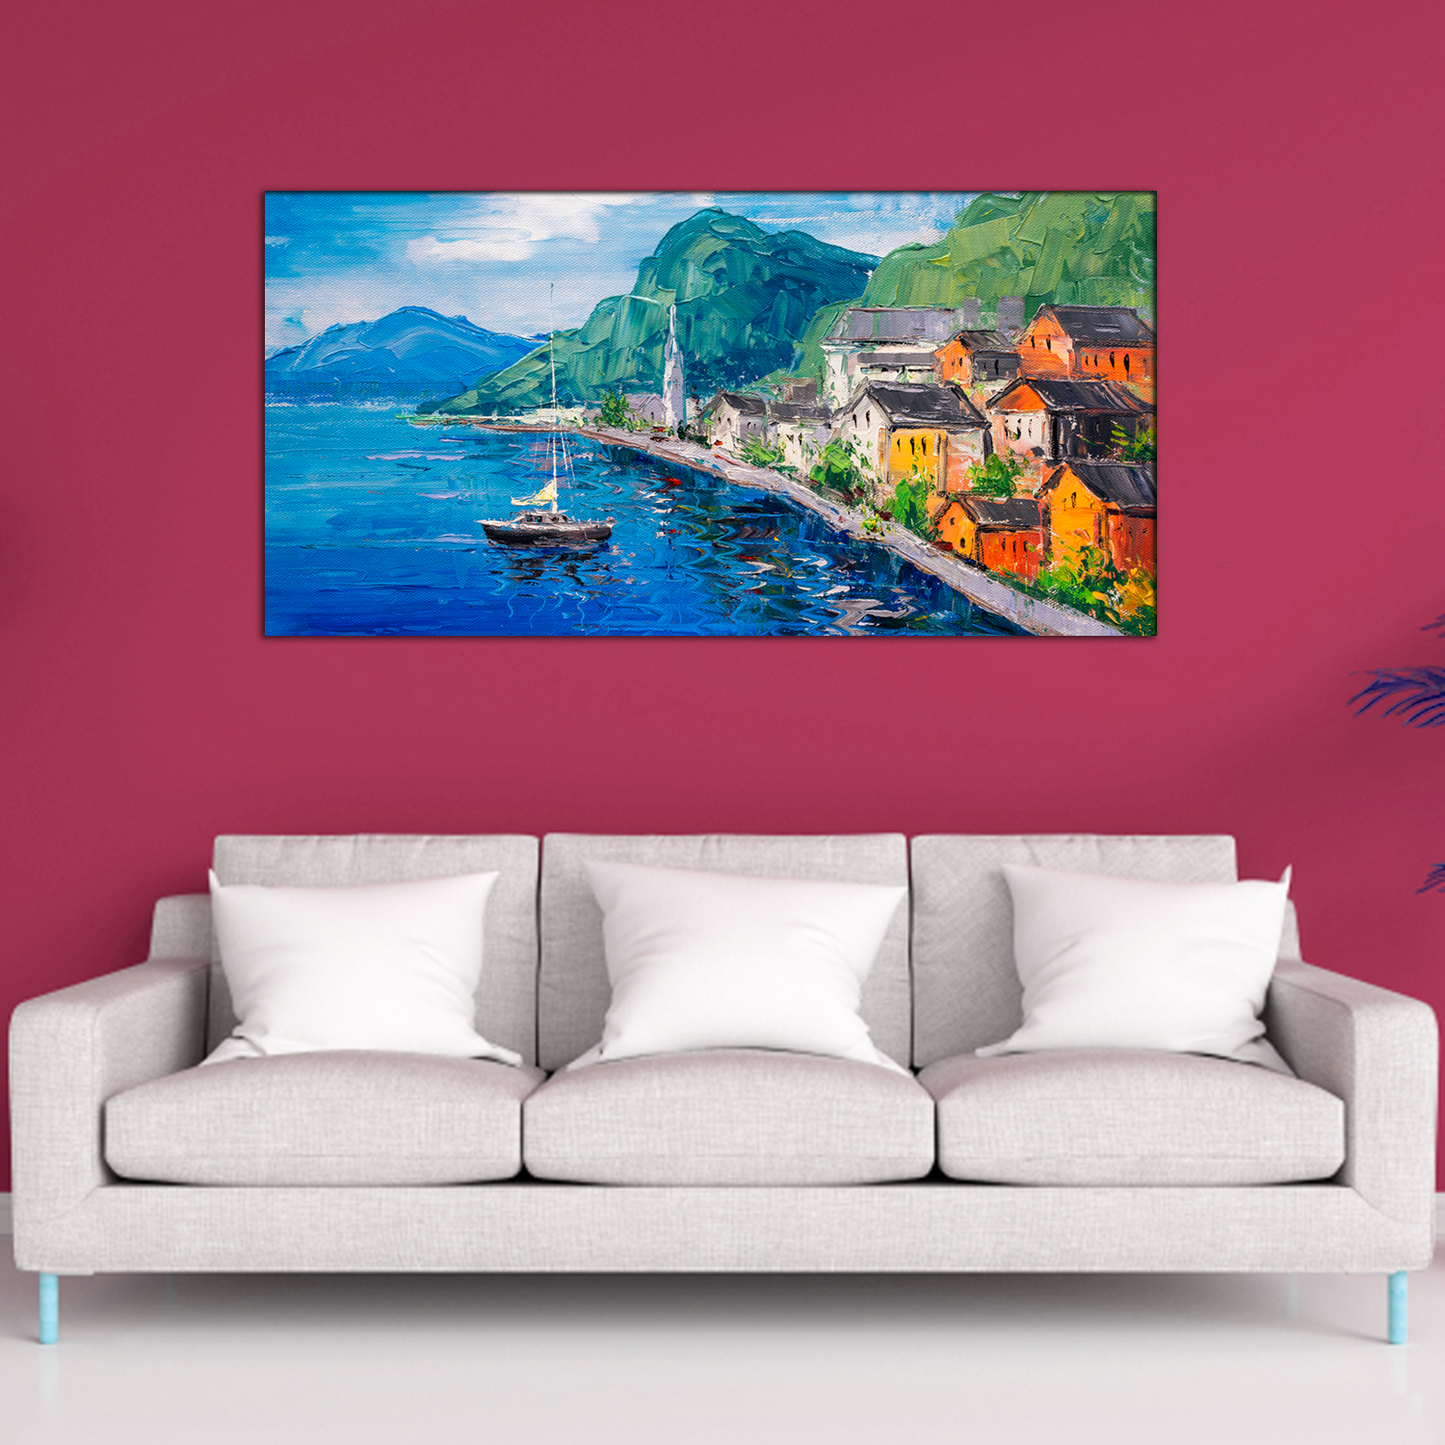 Mountain & River Abstract Canvas Print Wall Painting